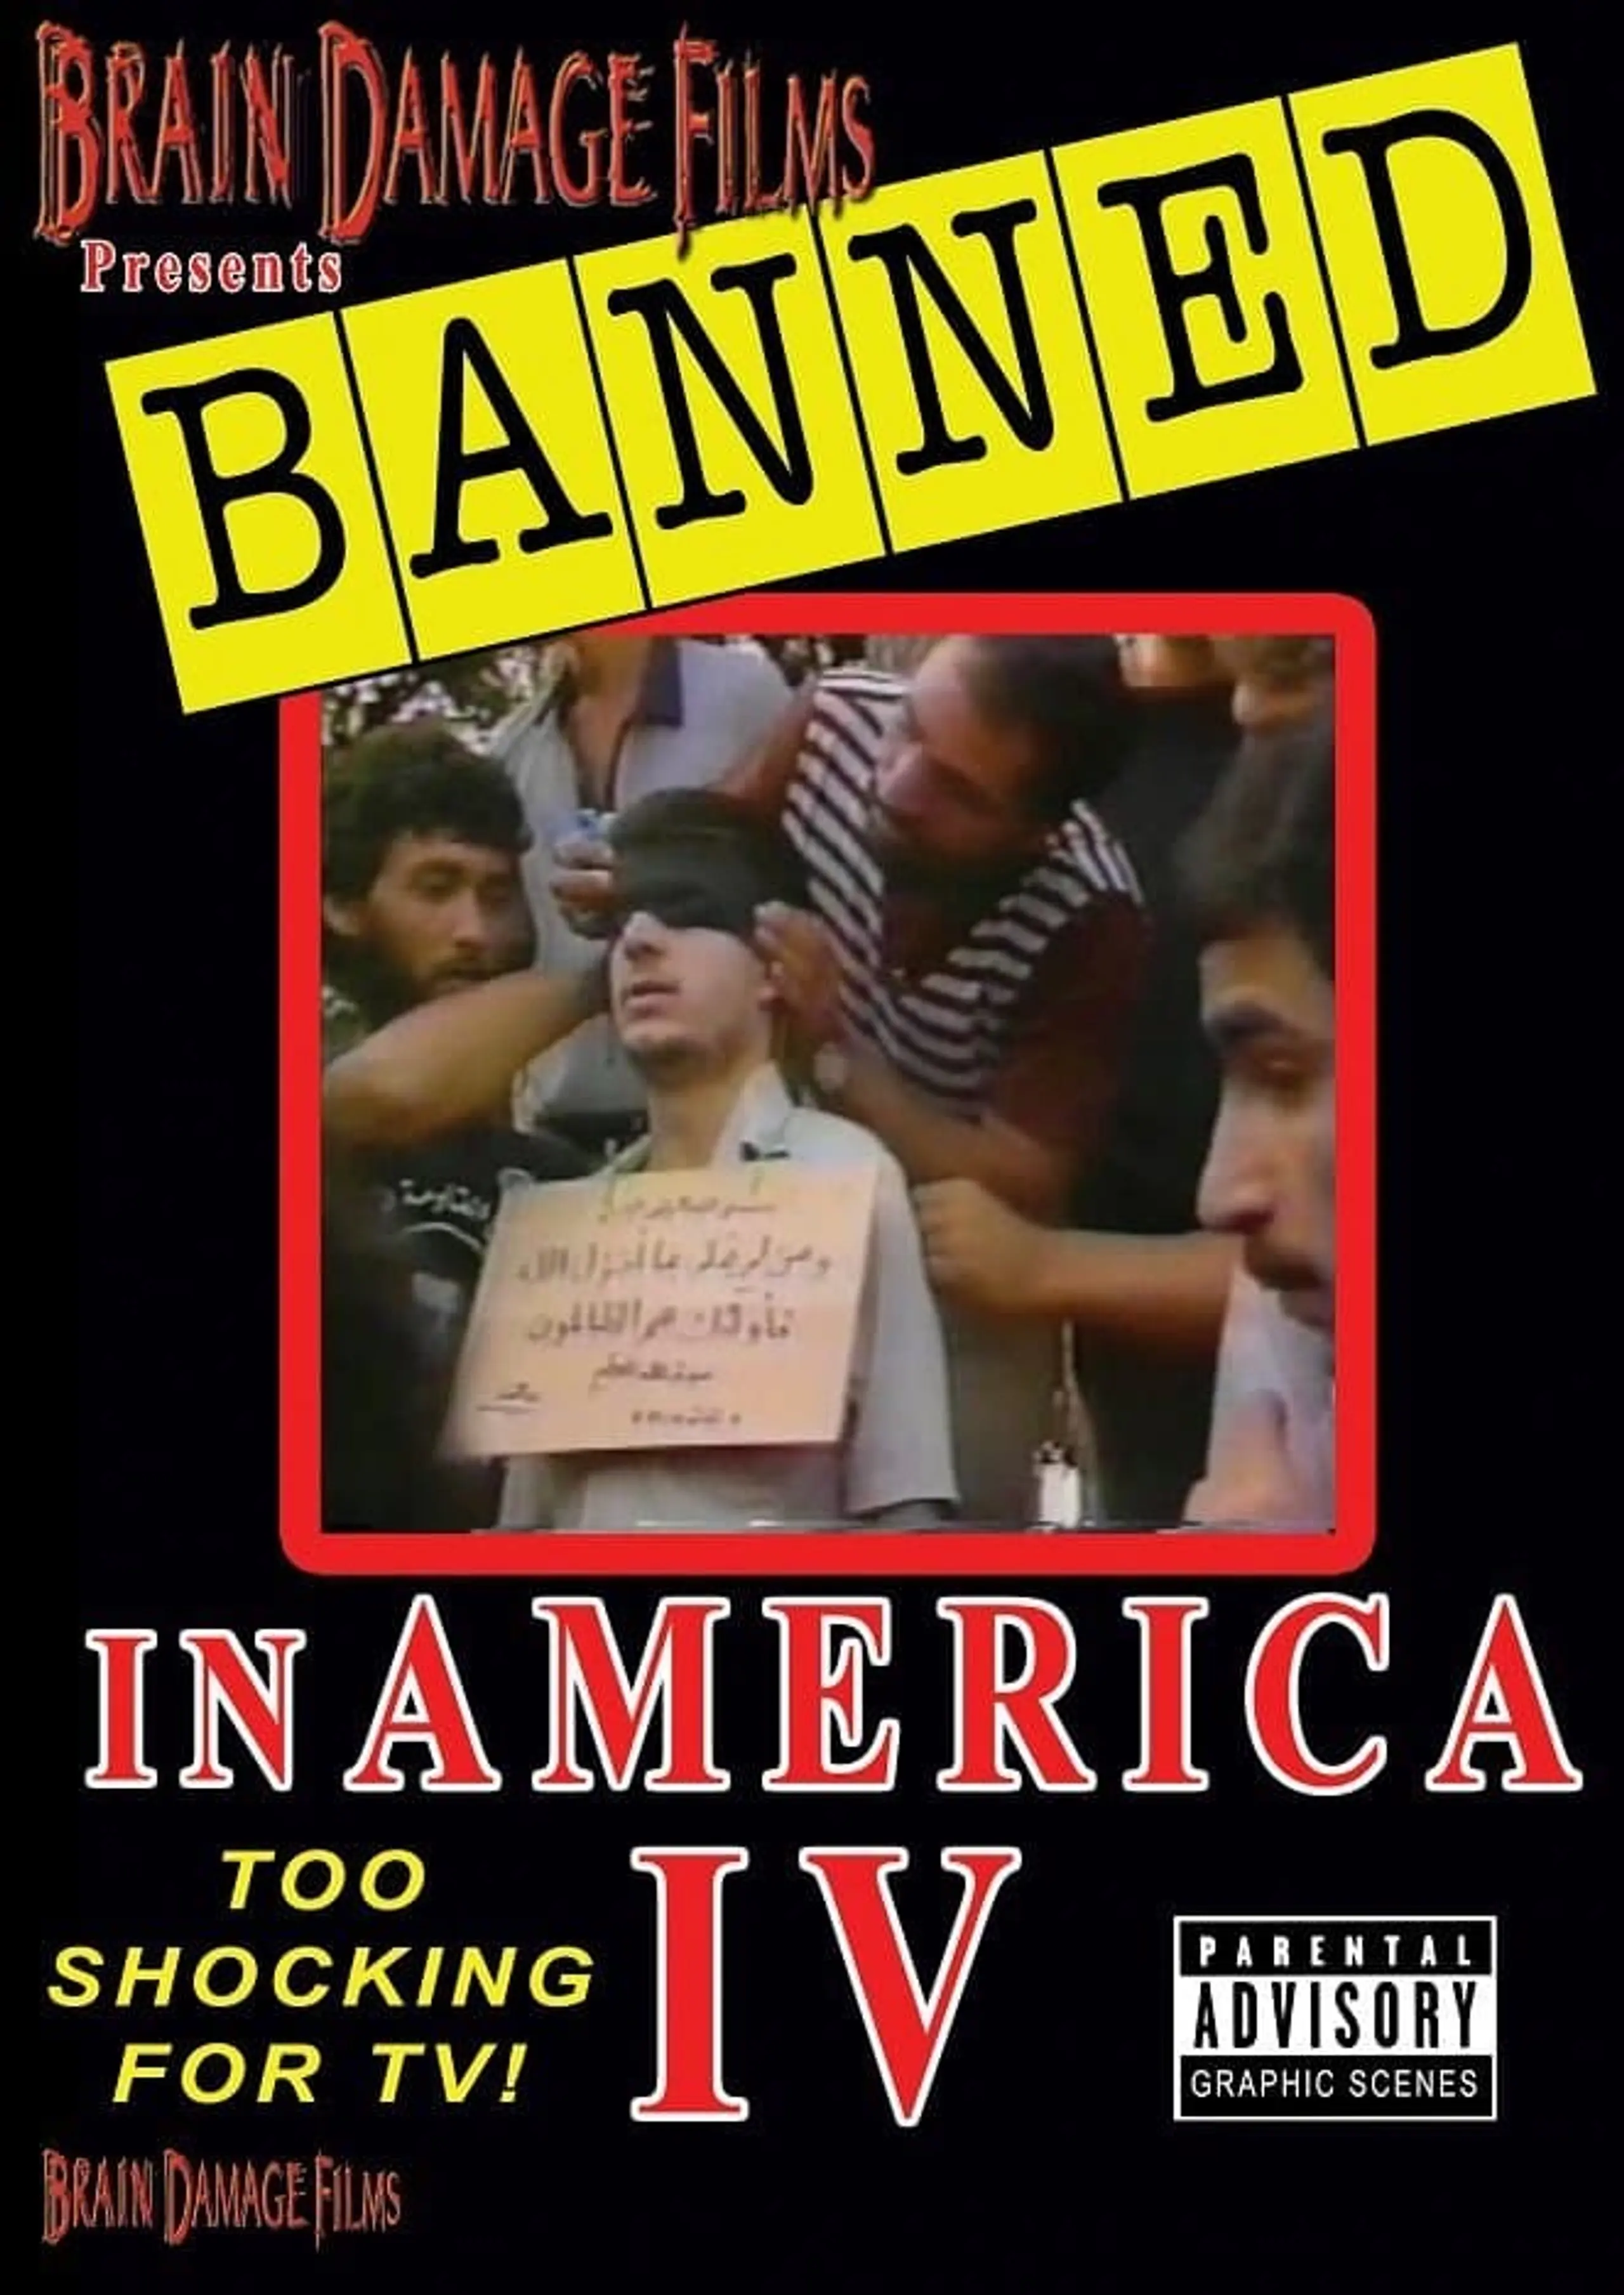 Banned! In America IV